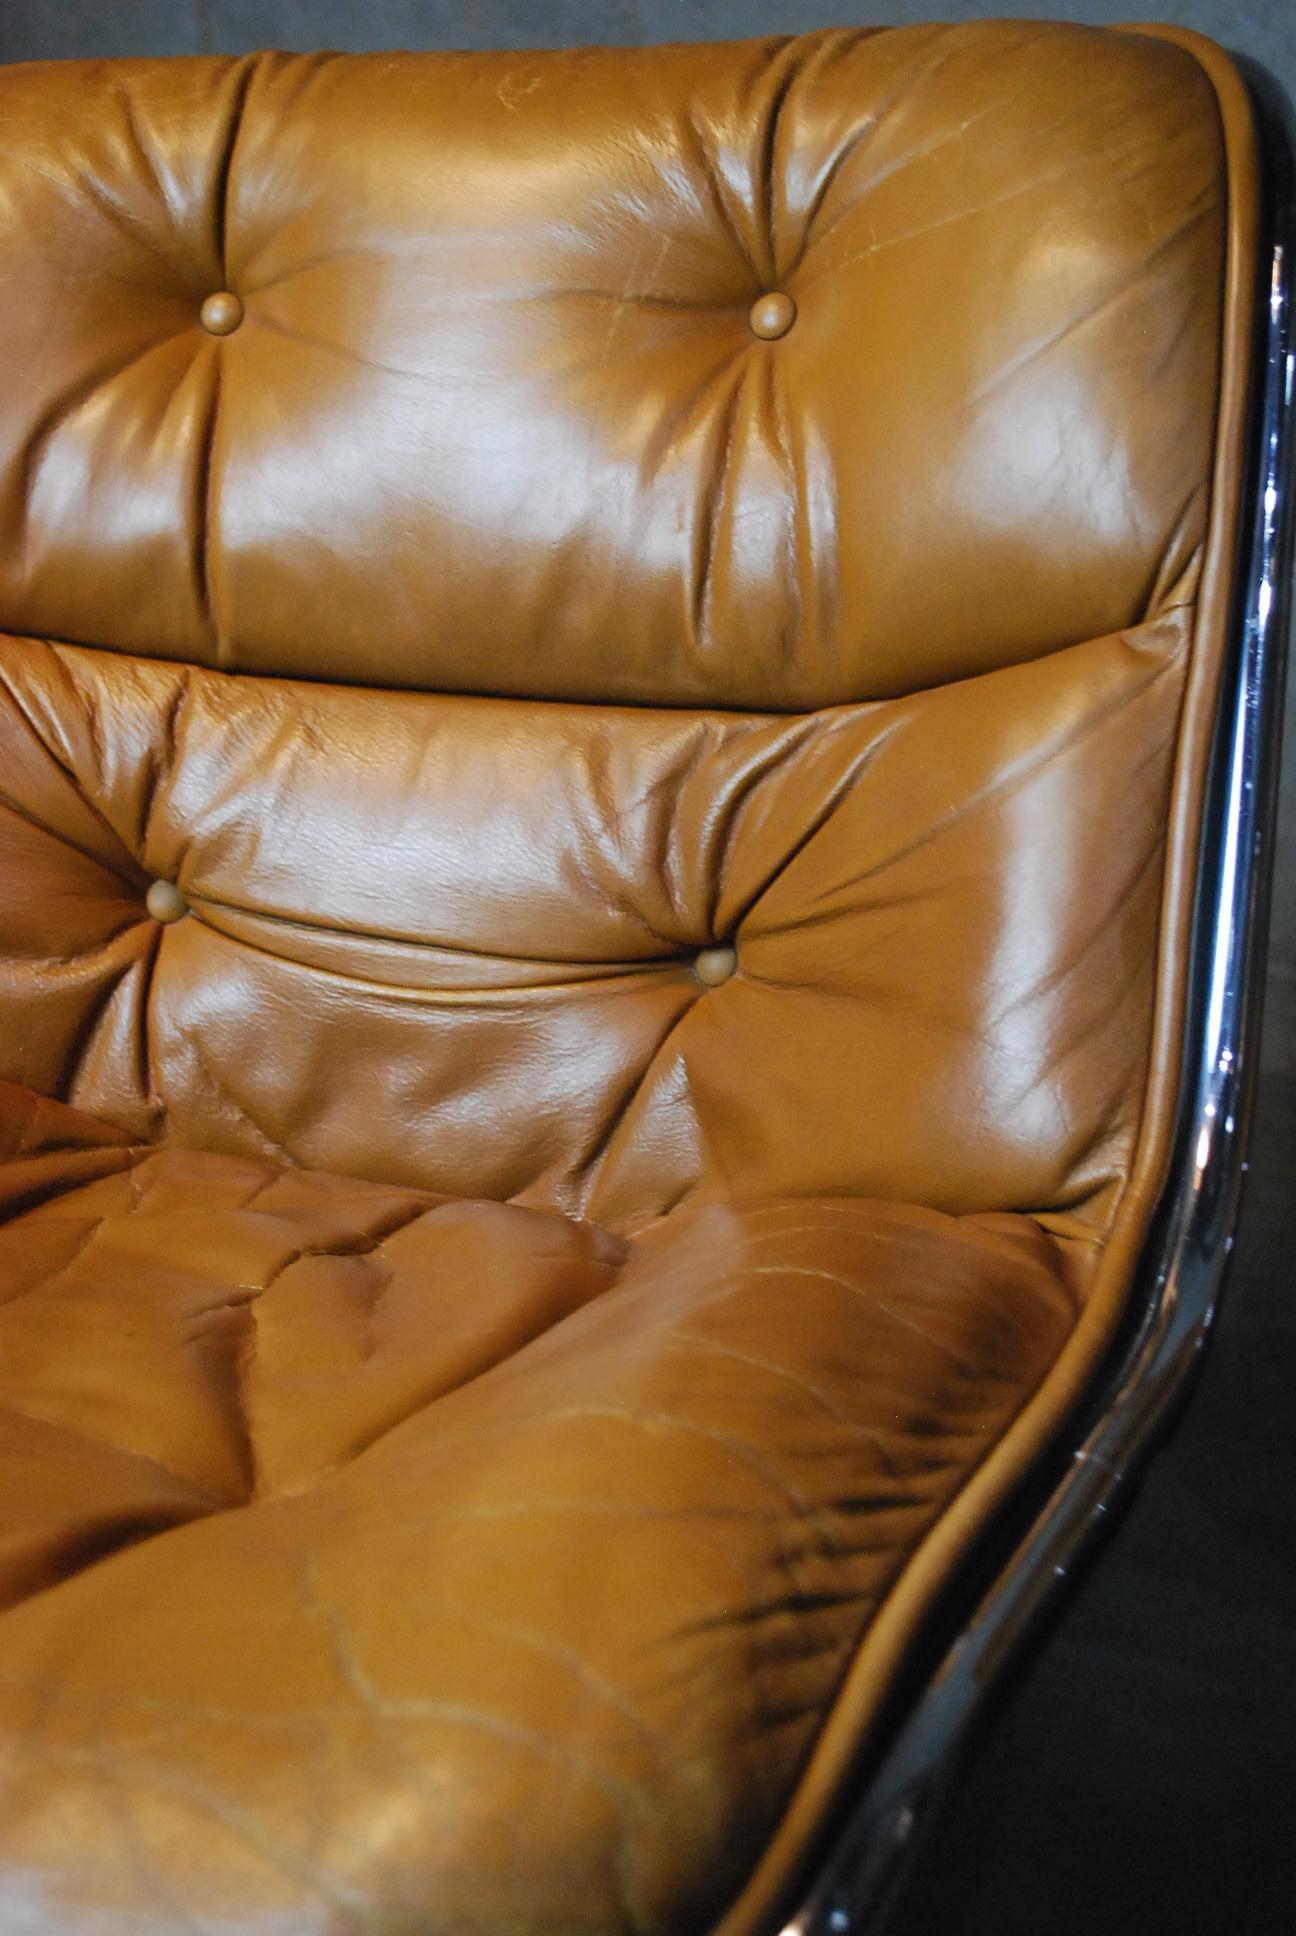 Set of executive leather chairs. Designed by Charles Pollock for Knoll. Tagged and in excellent condition. Great set of kitchen chairs as well.

Sold as a set. You need to take all four 

It has been more than half a century since the late Charles